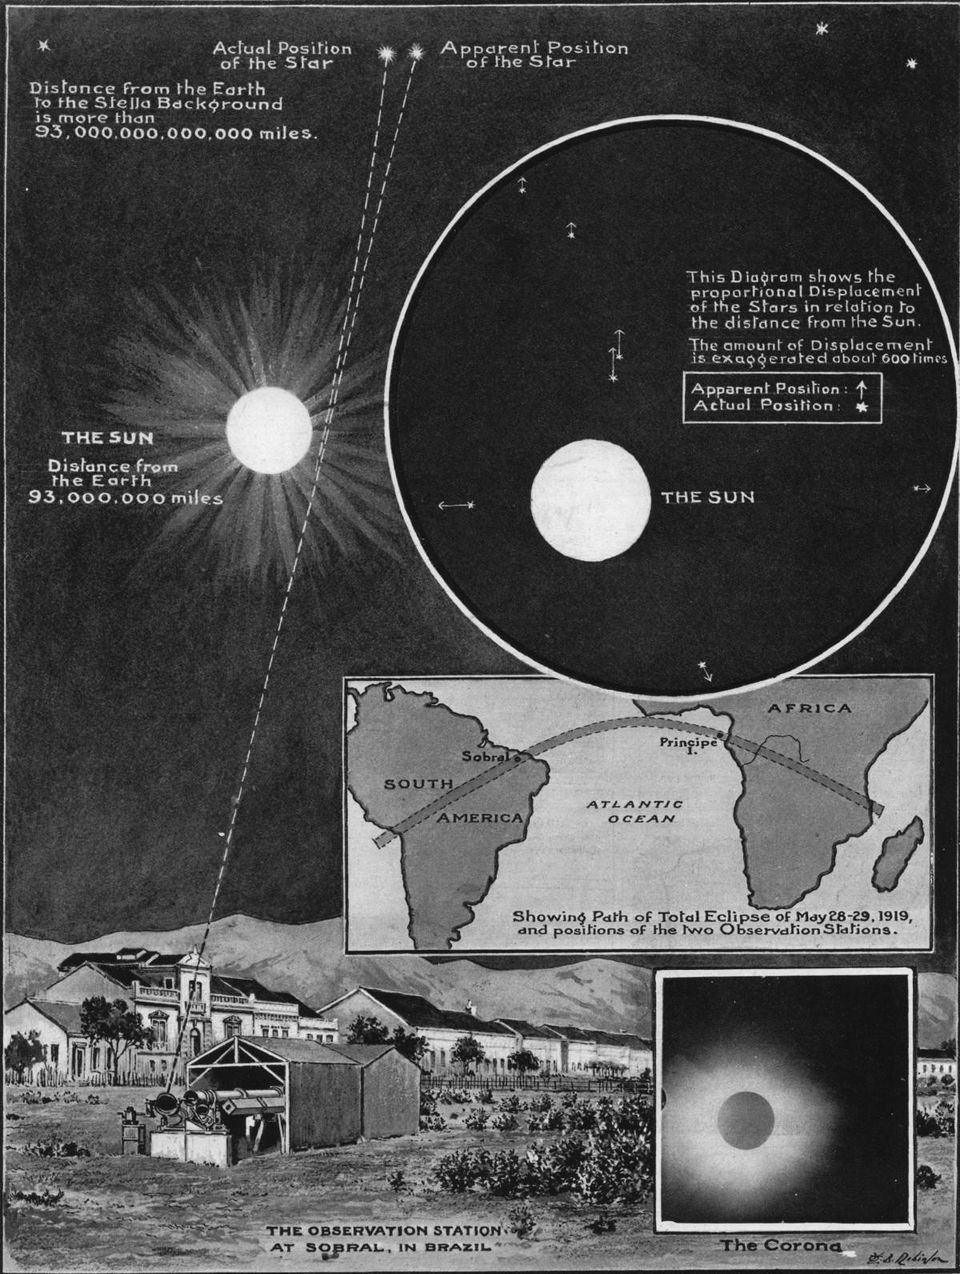 A reconstruction published in “The Illustrated London News” of November 22, 1919, showing the position shift of some stars near the solar edge observed during the total eclipse of May 29, 1919 (the extent of the shift is exaggerated 600 times to make evident the phenomenon). The measurements performed on the photographic plates confirmed the predictions of general relativity. Sun’s gravity was actually able to bend the path of light, making the stars near the solar edge appear in a slightly different position from the usual one